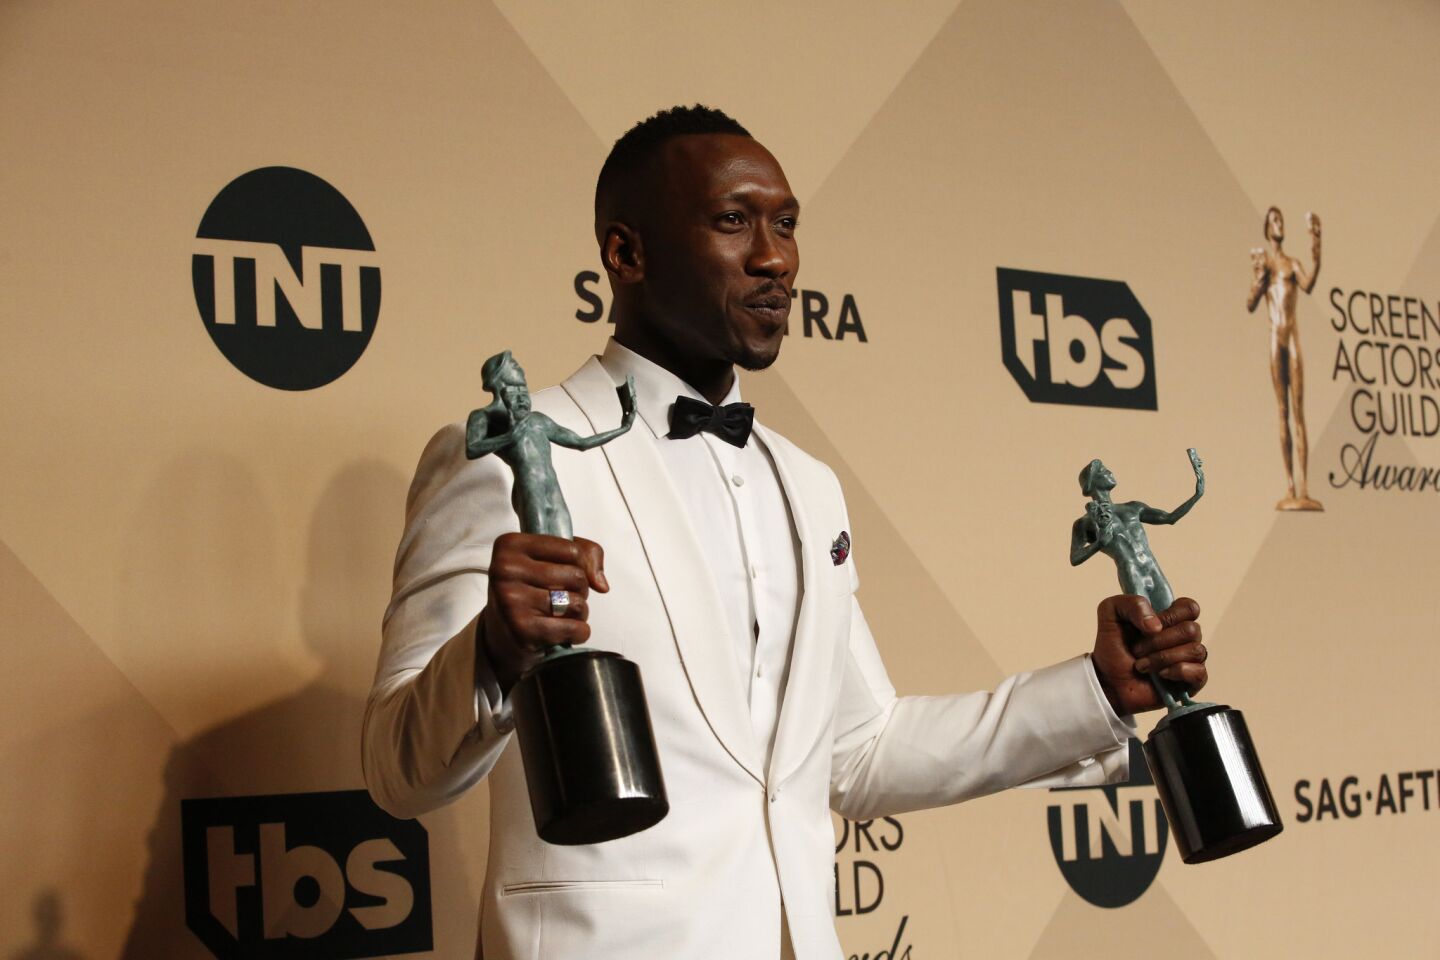 Mahershala Ali holds his awards for supporting actor in "Moonlight" as well as his award for "Hidden Figures," which won an ensemble award.